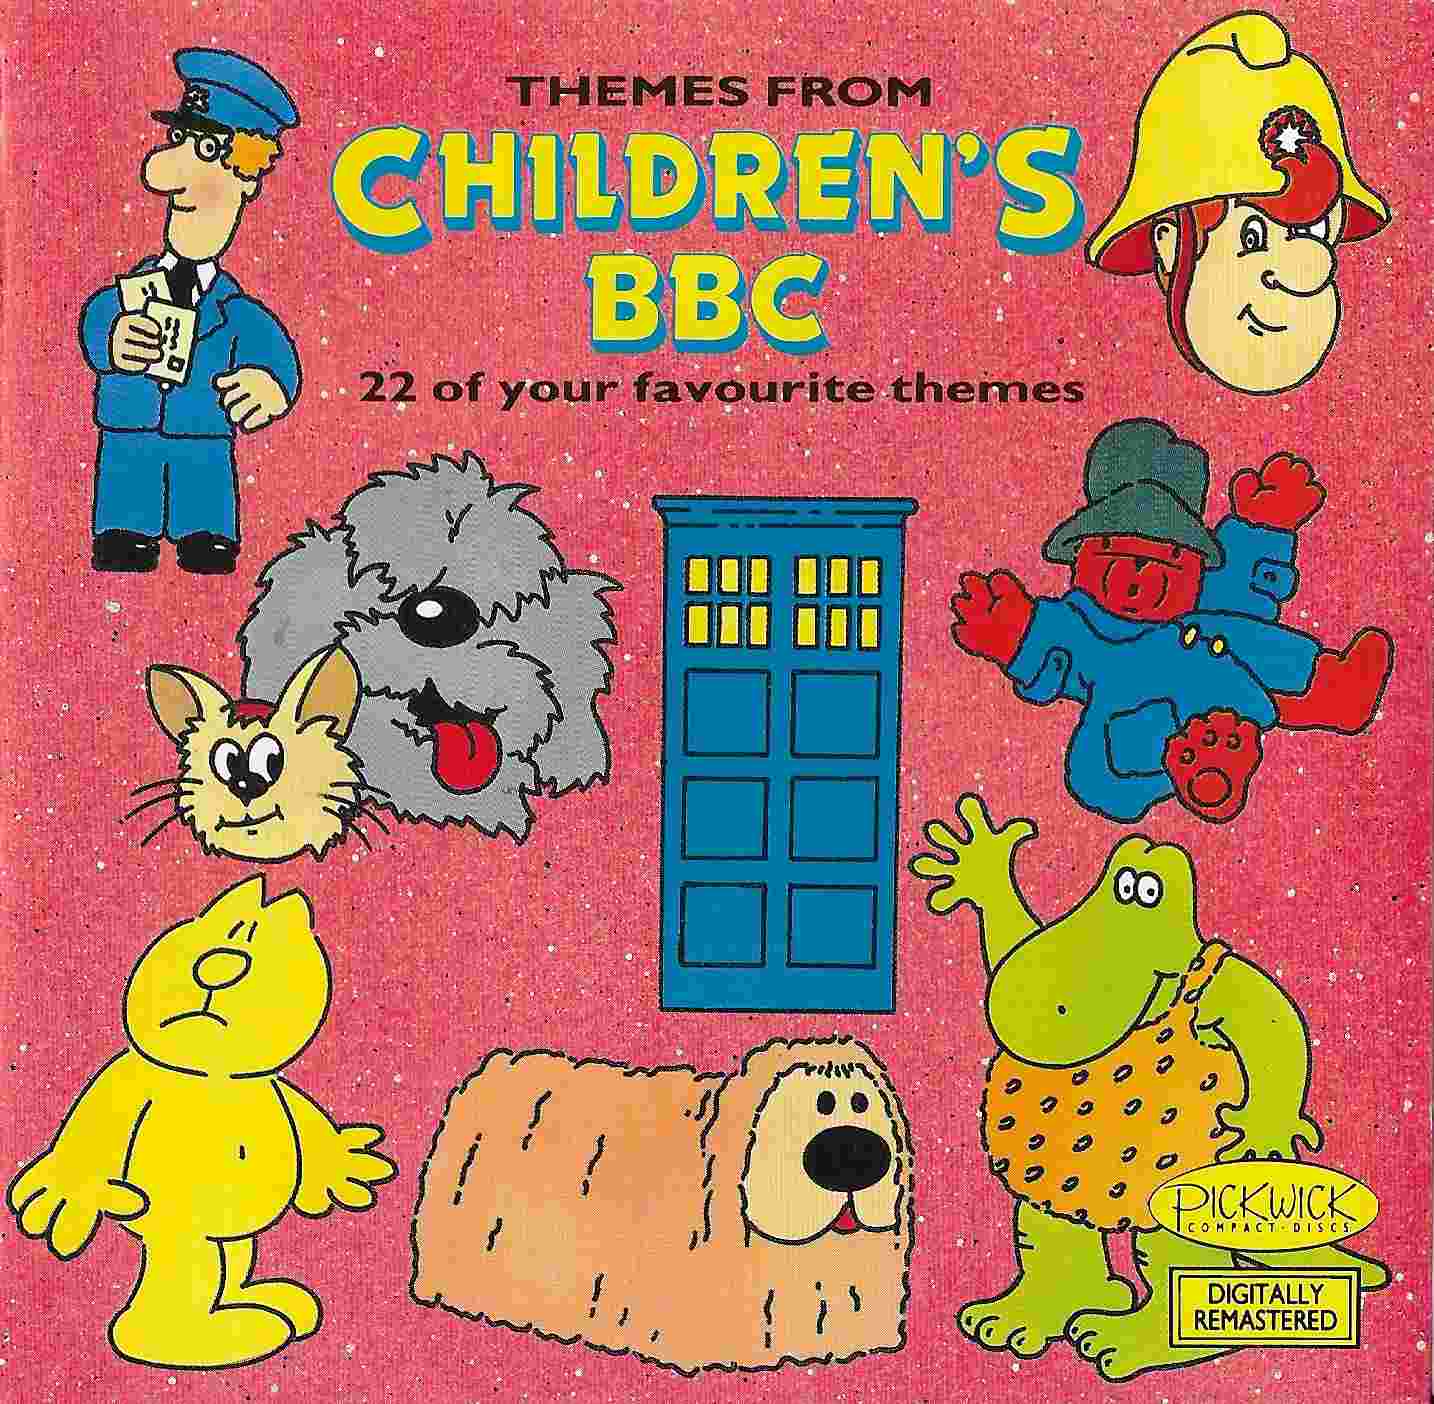 Picture of Children's themes from the BBC by artist Various from the BBC cds - Records and Tapes library